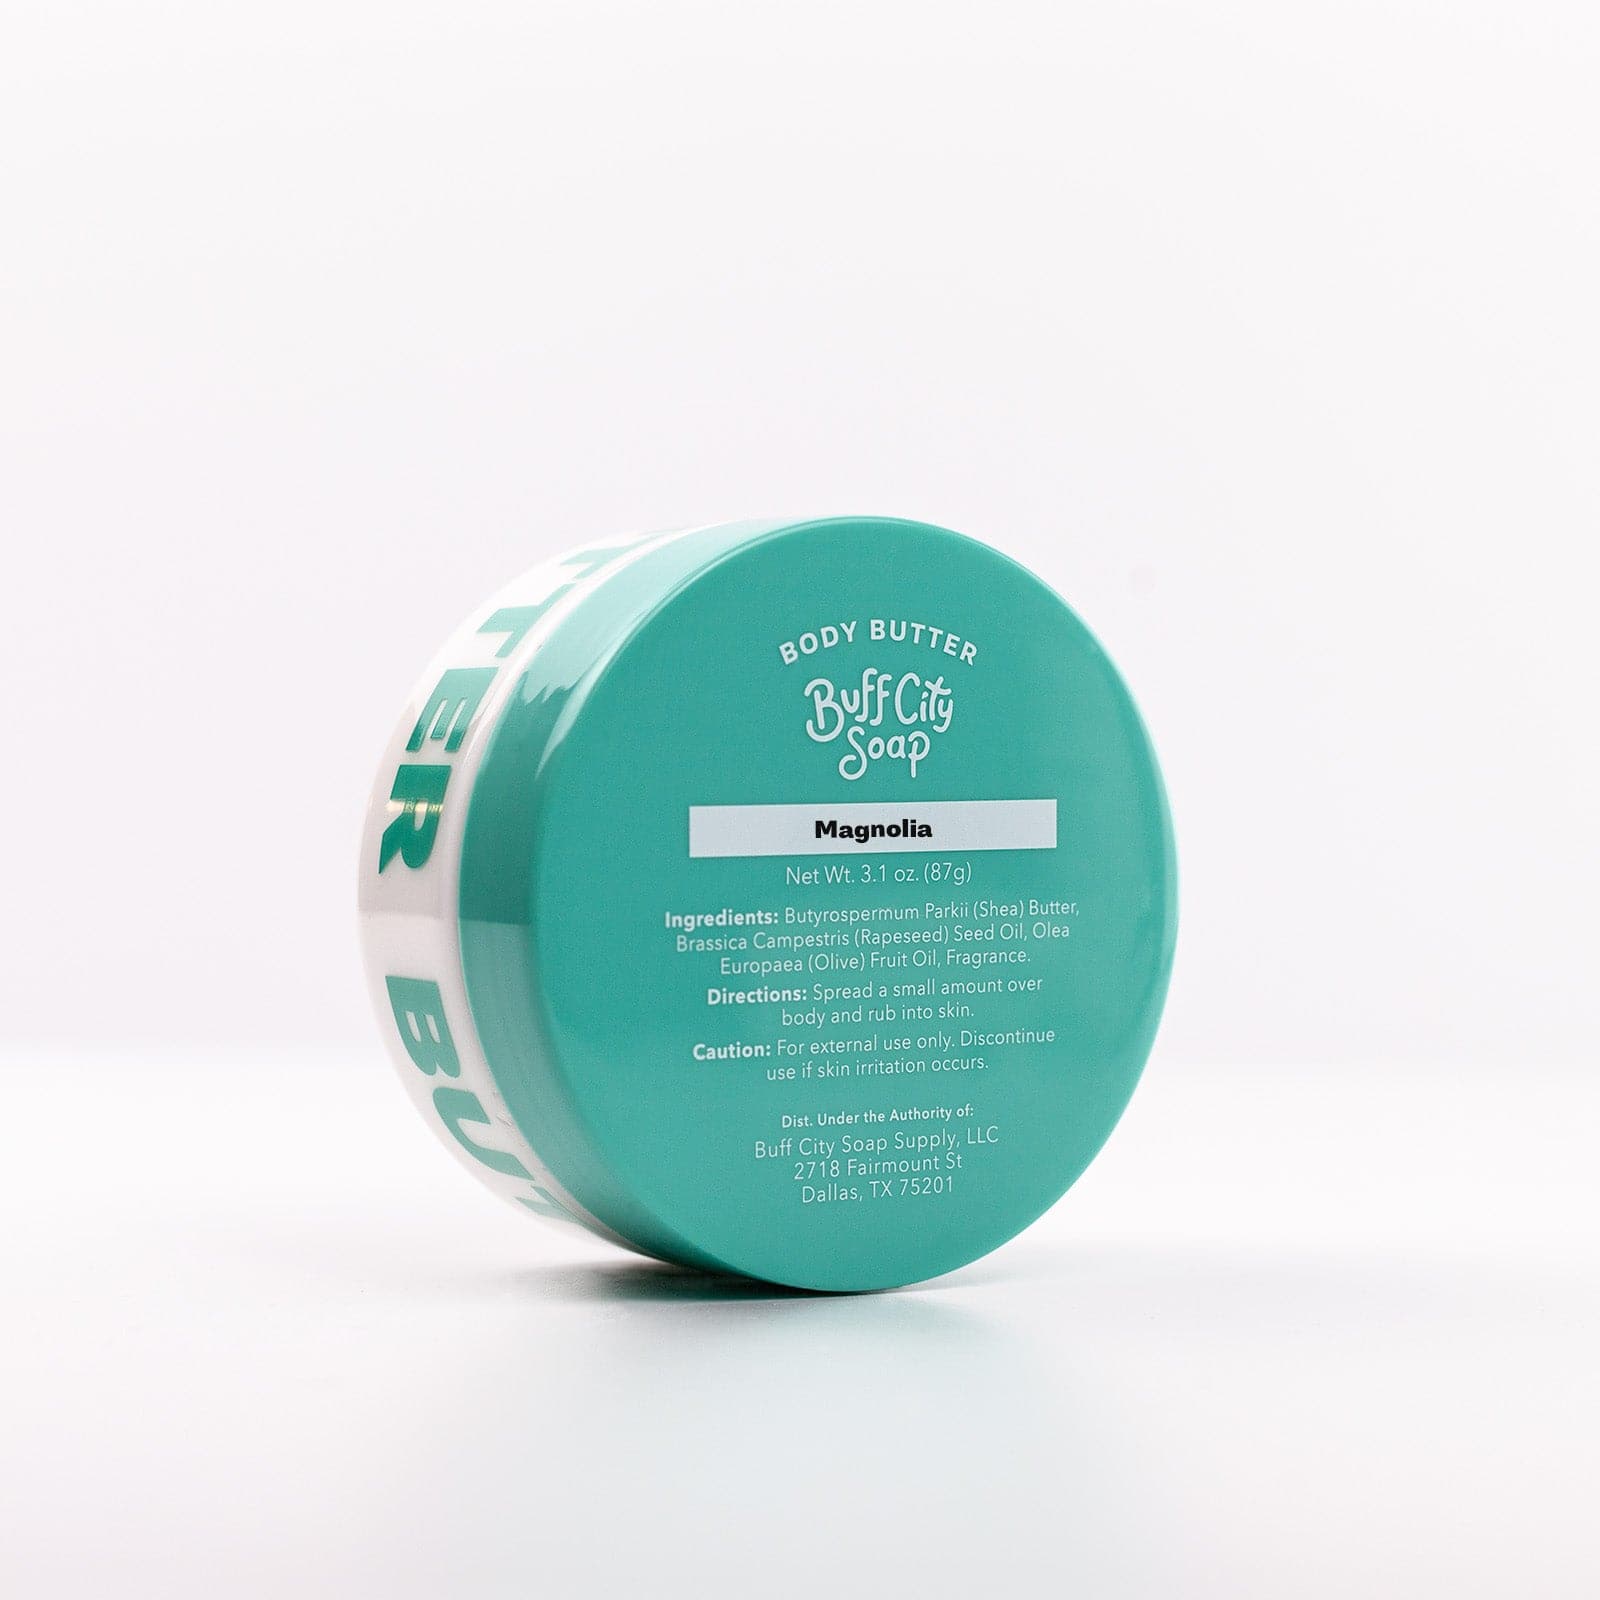 Magnolia Body Butter container with teal lid standing upright and angled against white background